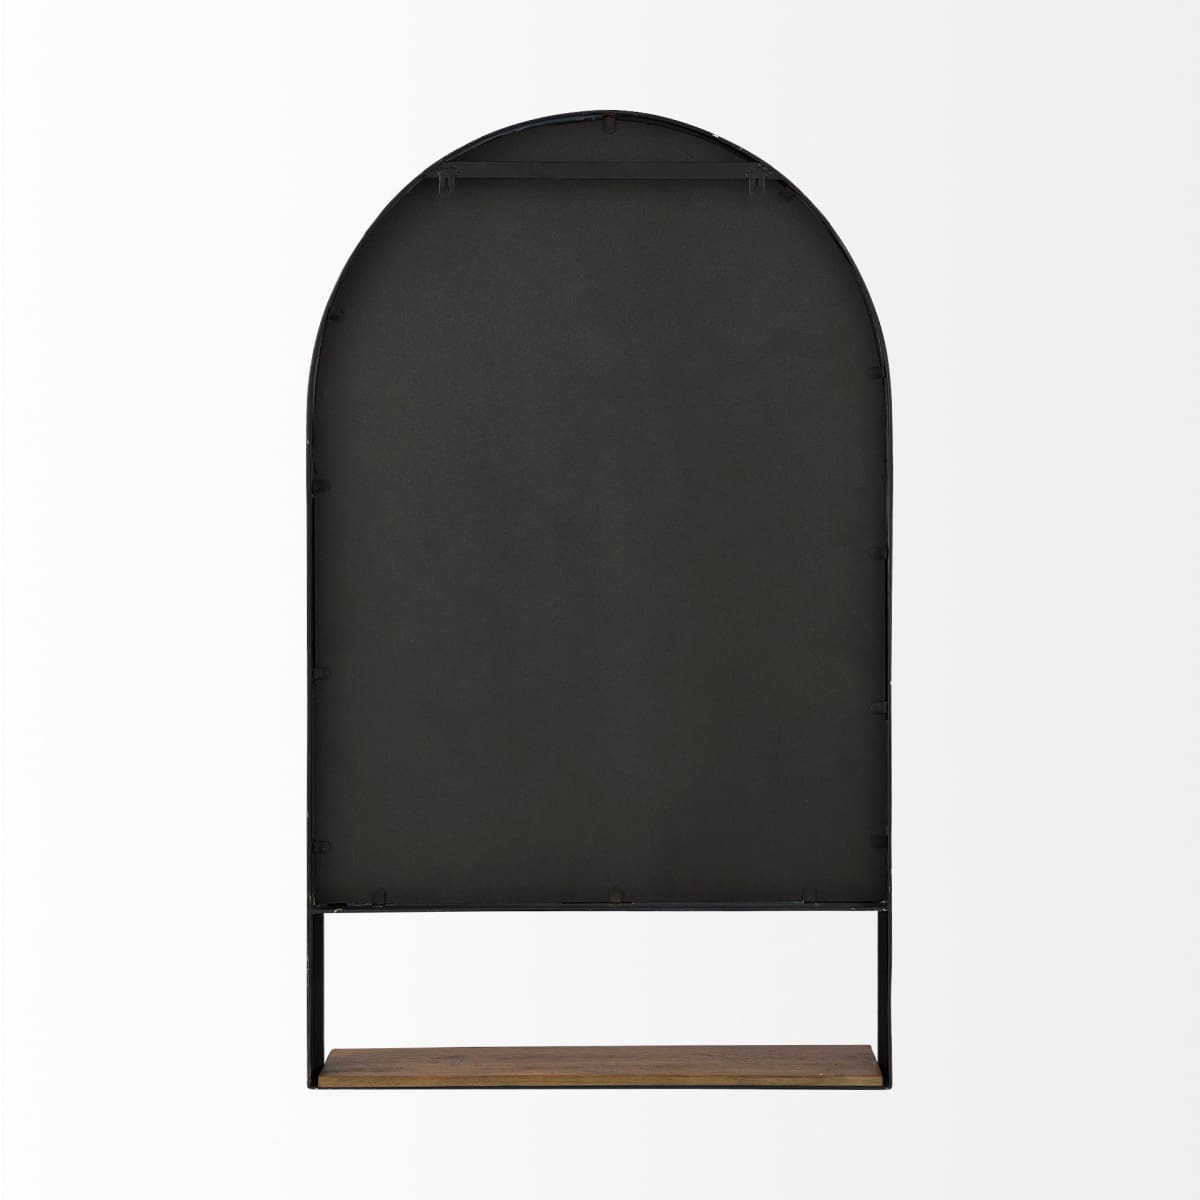 Cora Wall Mirror Black Metal | Arch - wall-mirrors-grouped